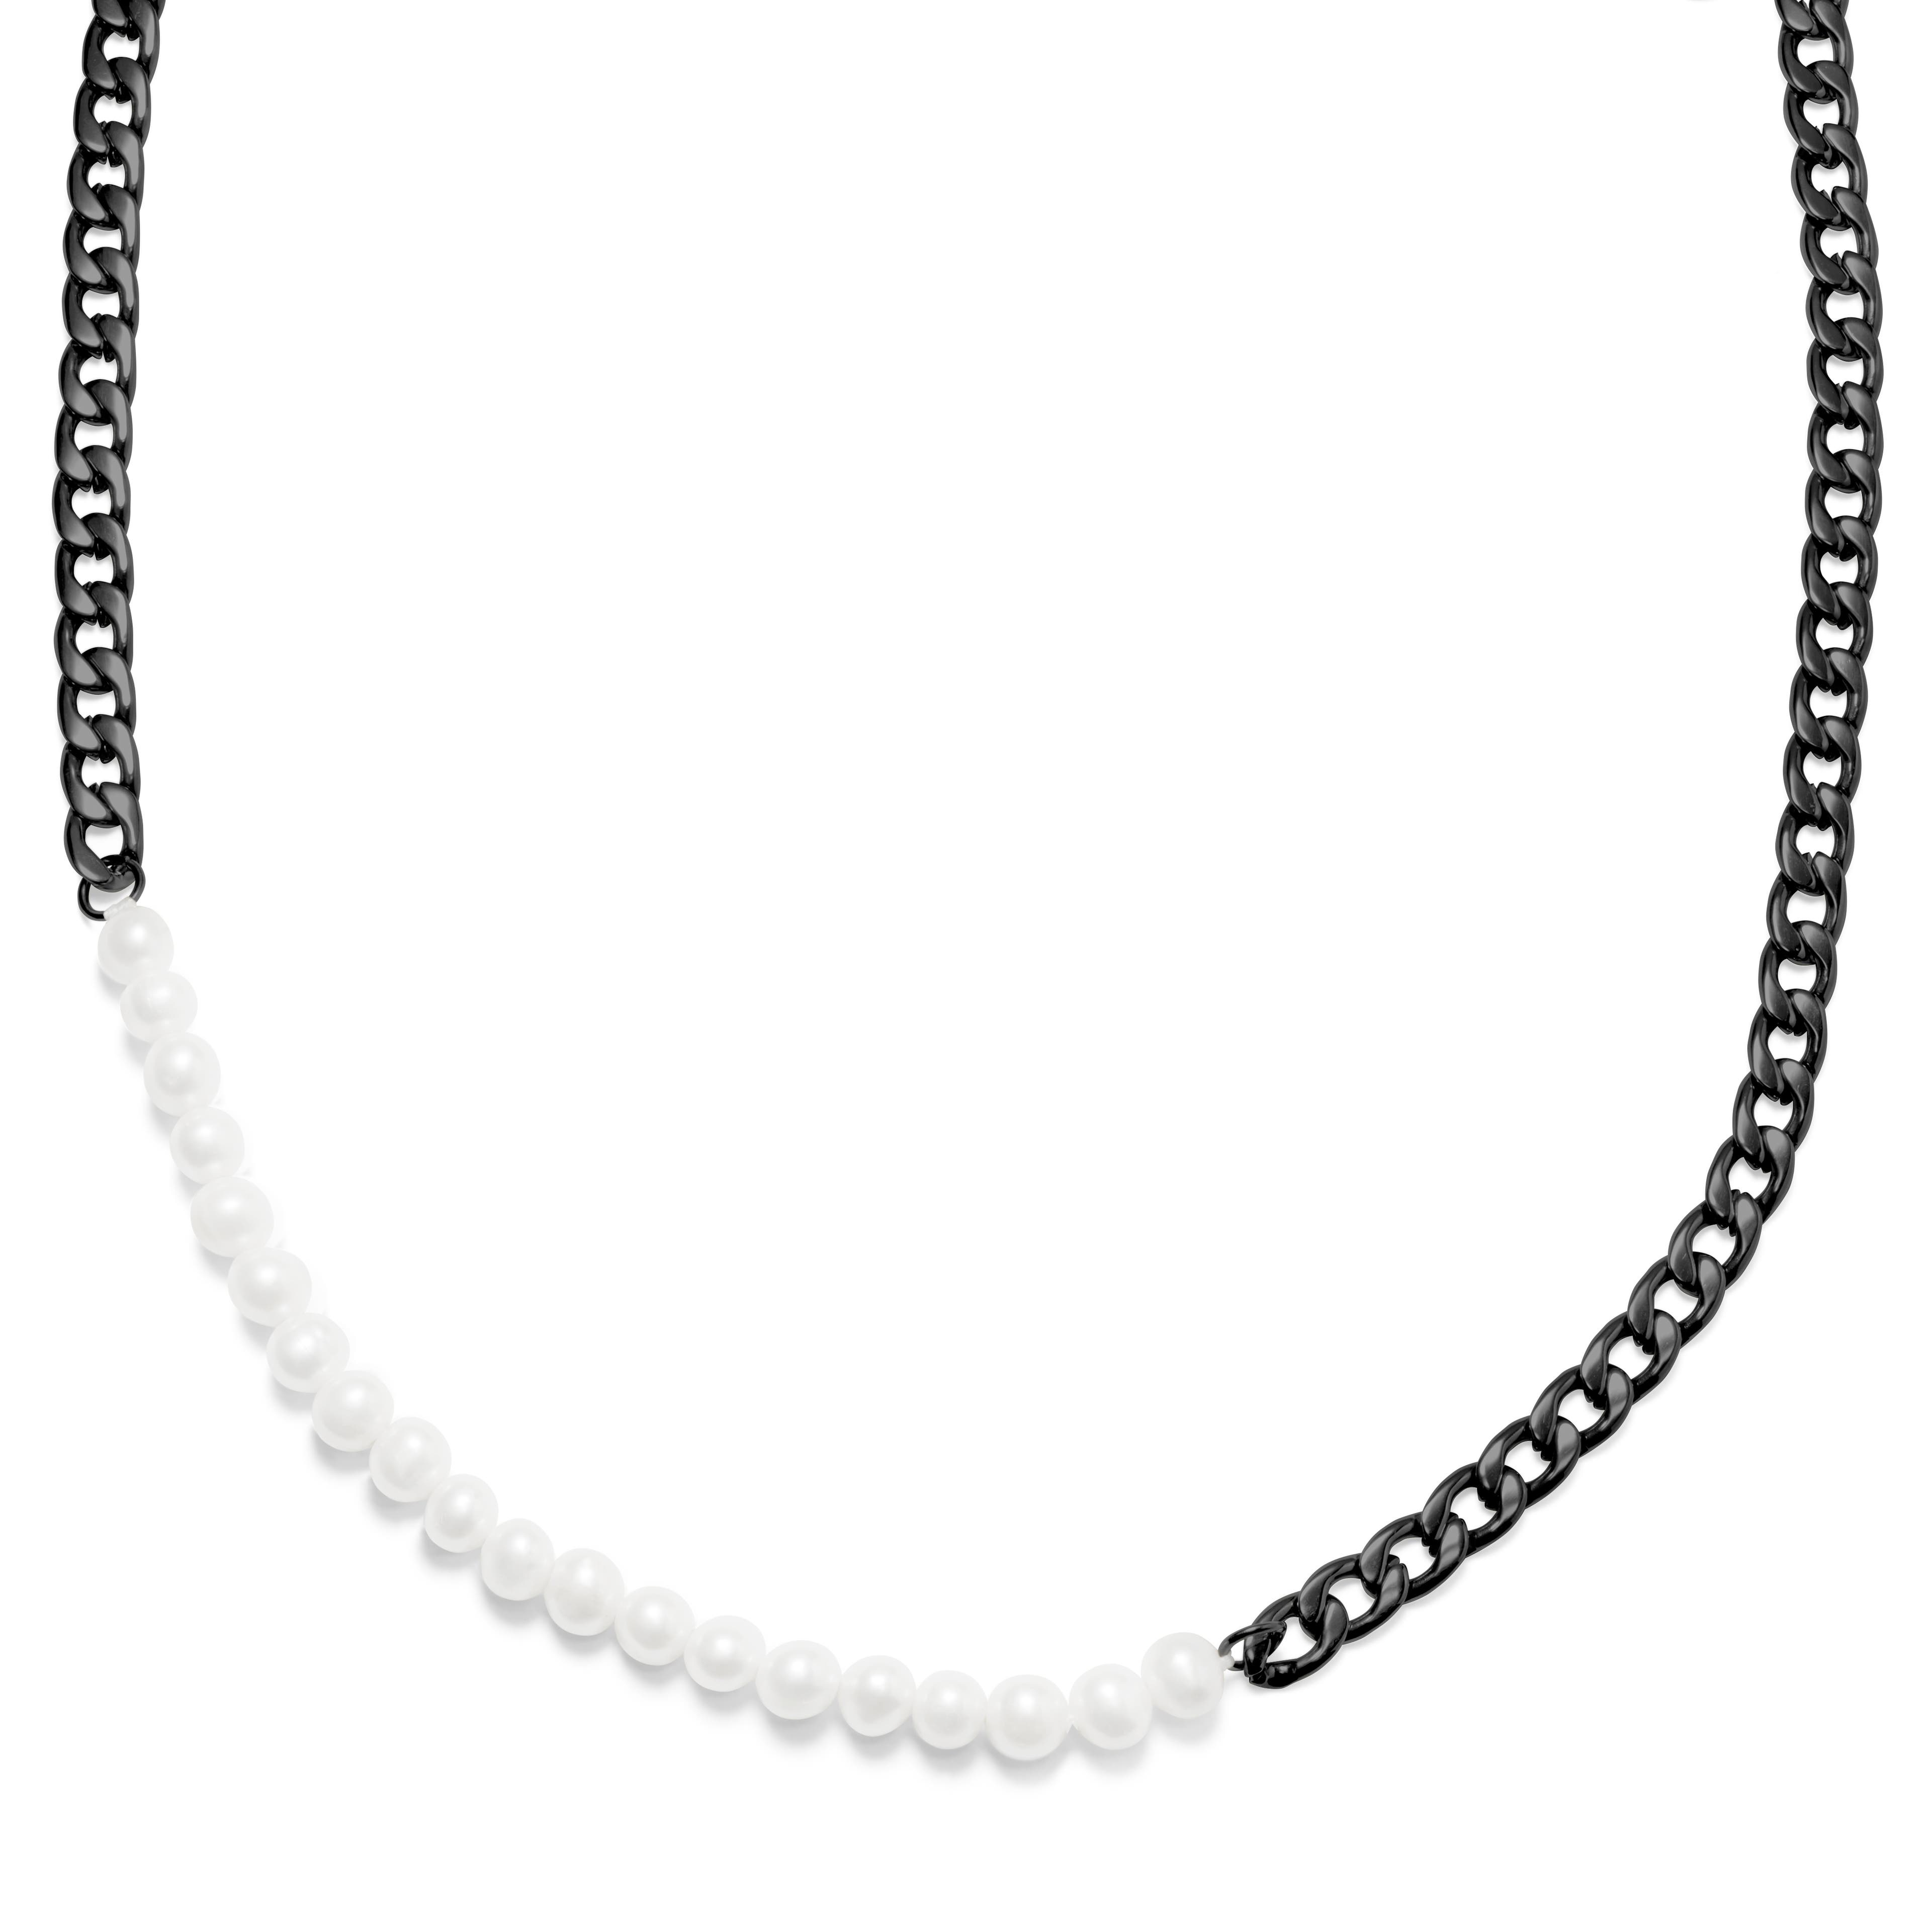 Amager | 7 mm Gunmetal Stainless Steel & White Pearl Curb Chain Necklace